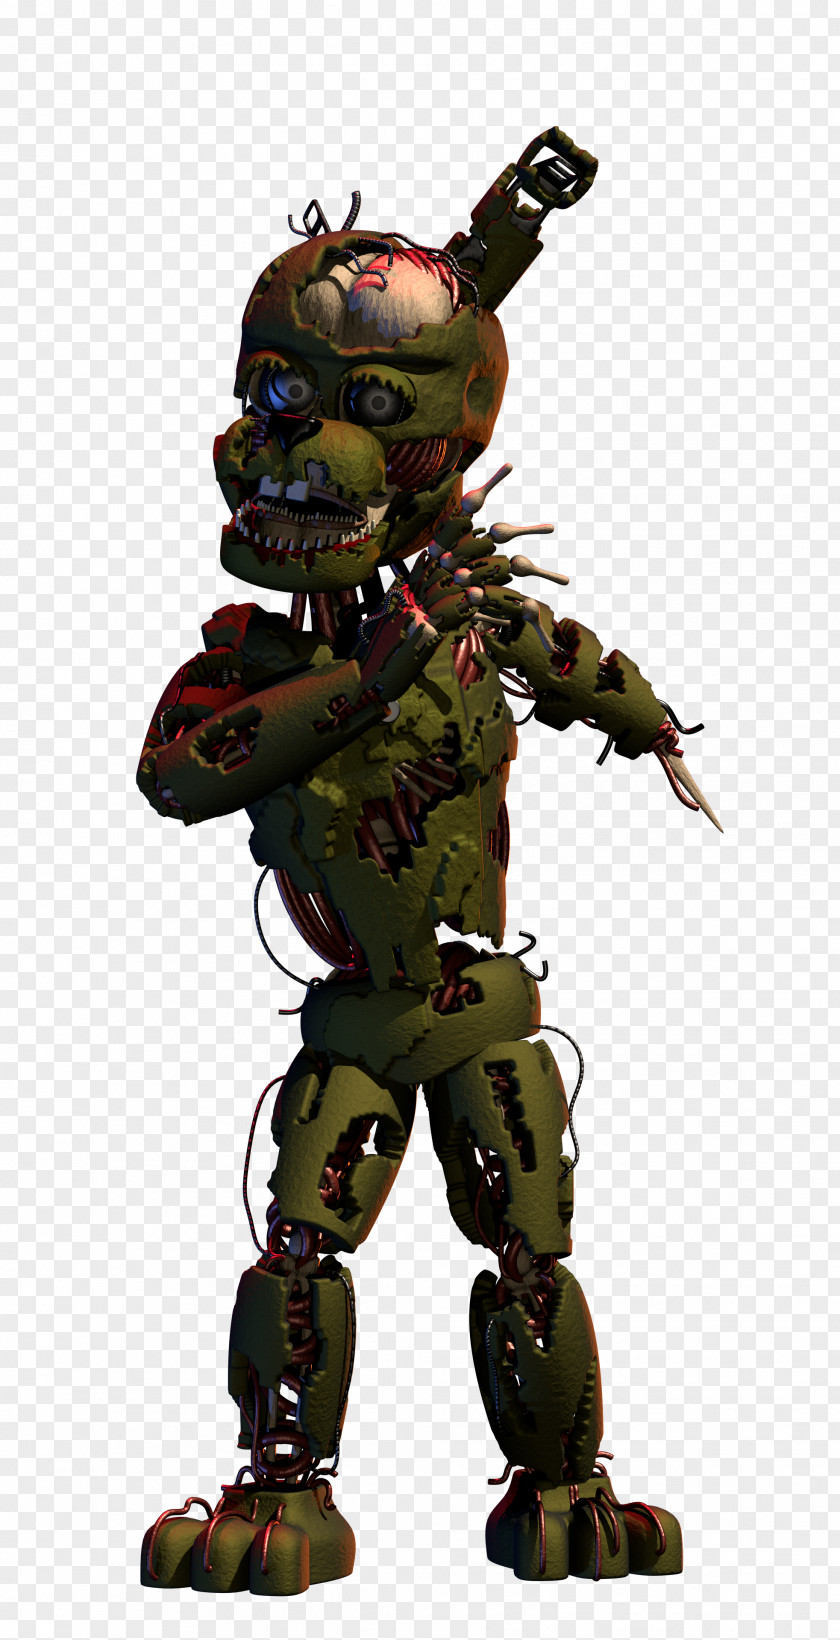 Withered Leaf Five Nights At Freddy's Video Jump Scare Art PNG